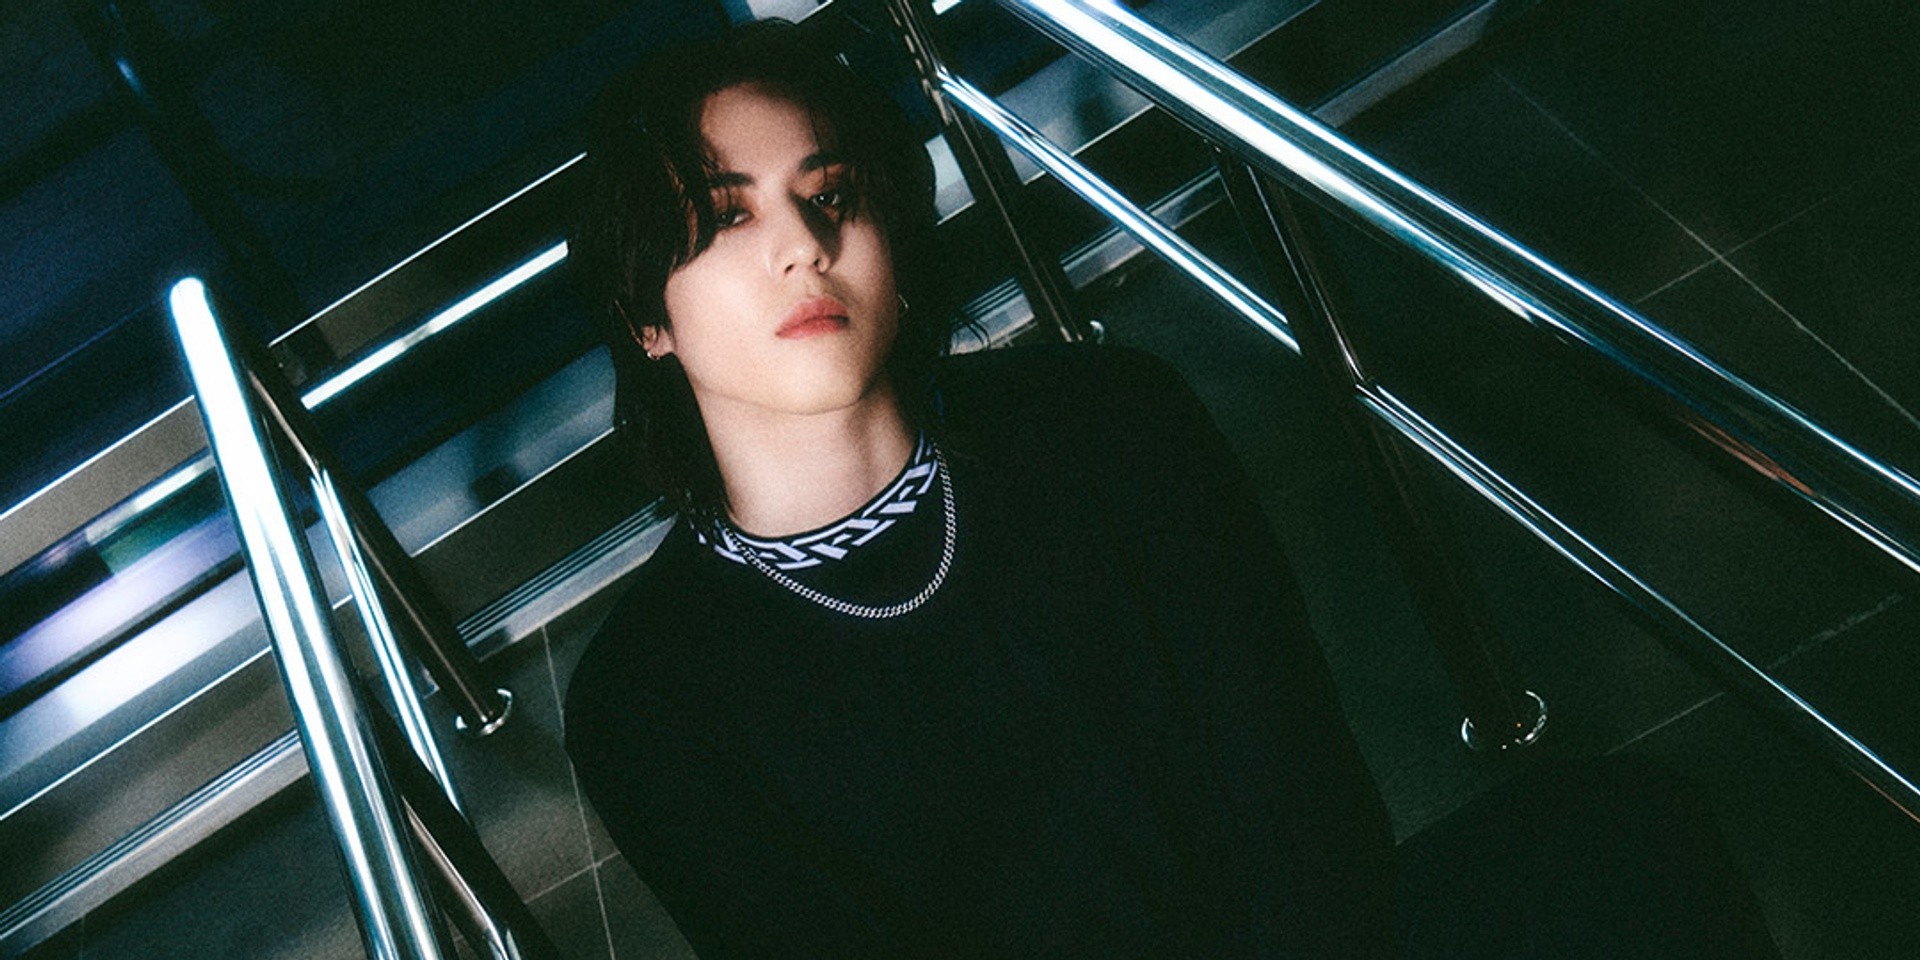 GOT7's YUGYEOM to return with 'Ponytail' this January